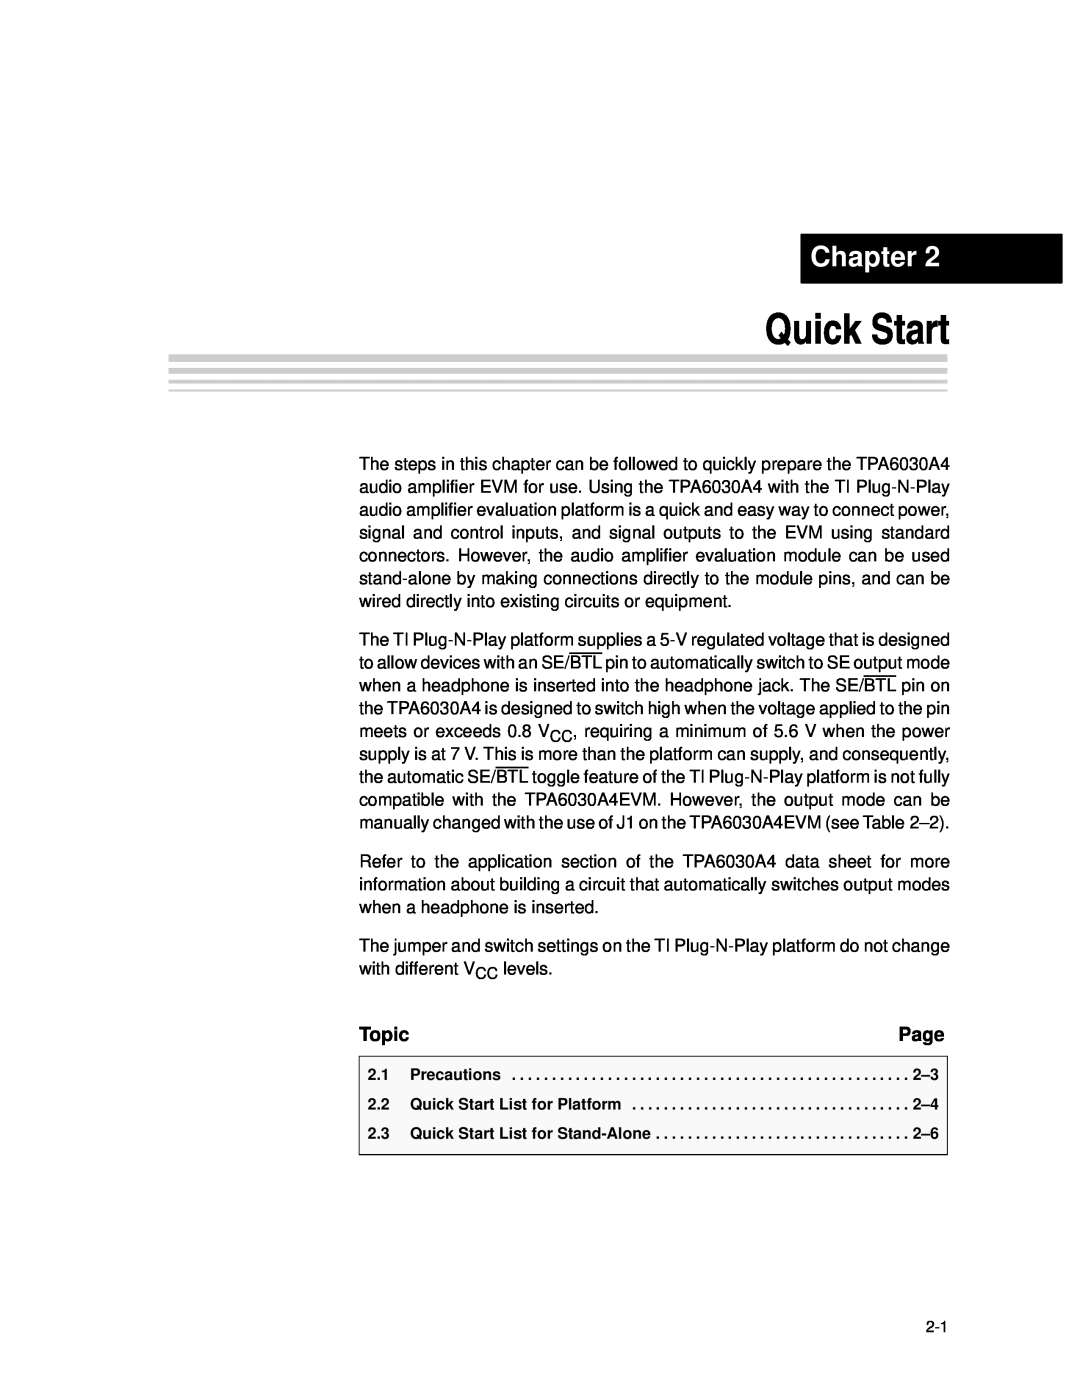 Texas Instruments TPA6030A4 manual Quick Start, Chapter, Page, Topic 